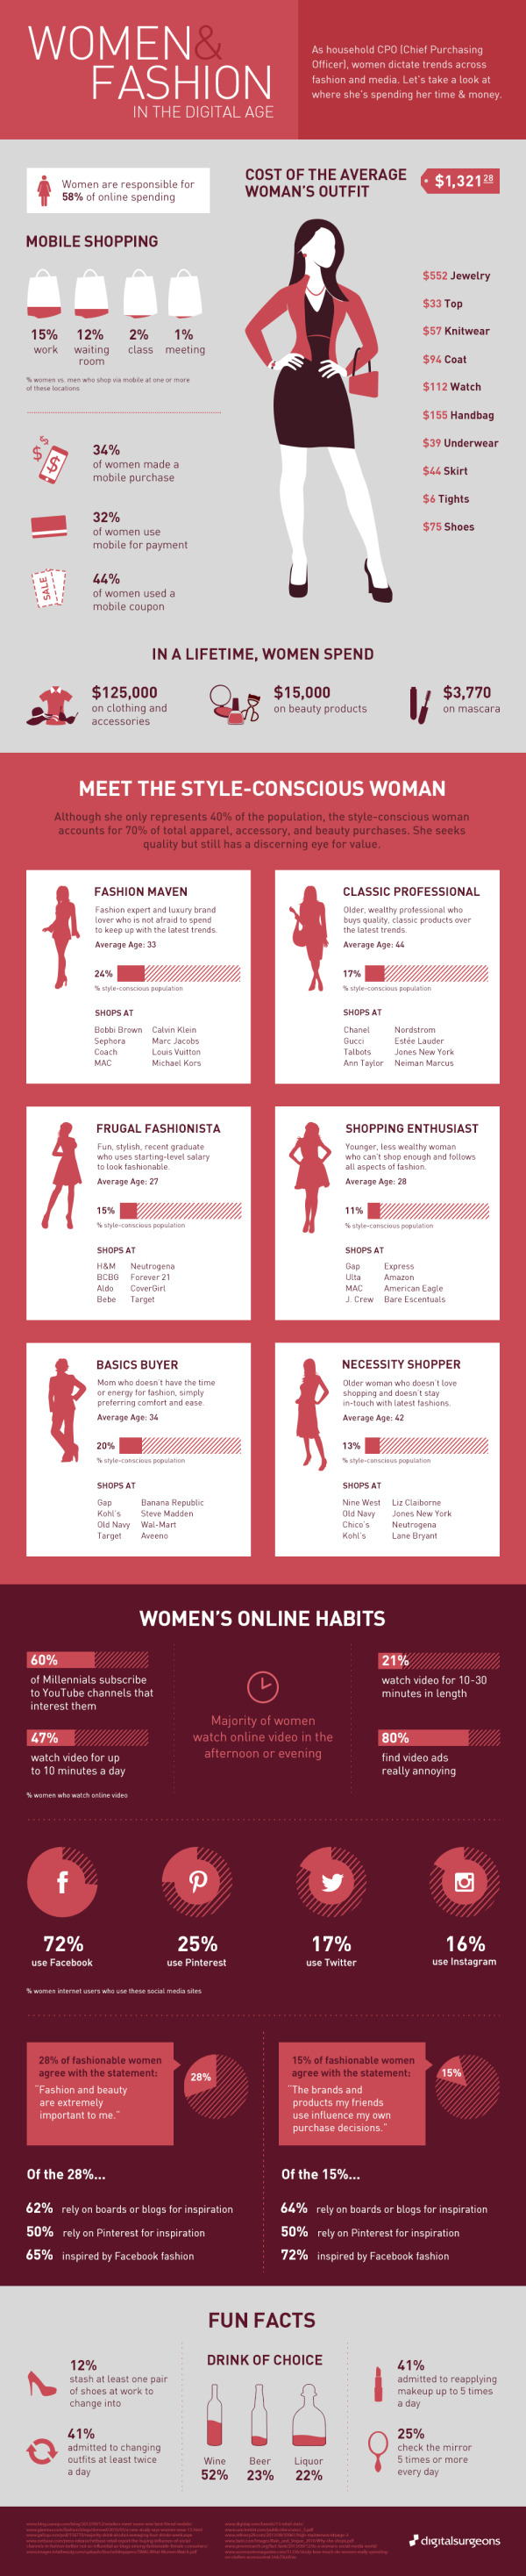 Women and Fashion: In the Digital Age infographic